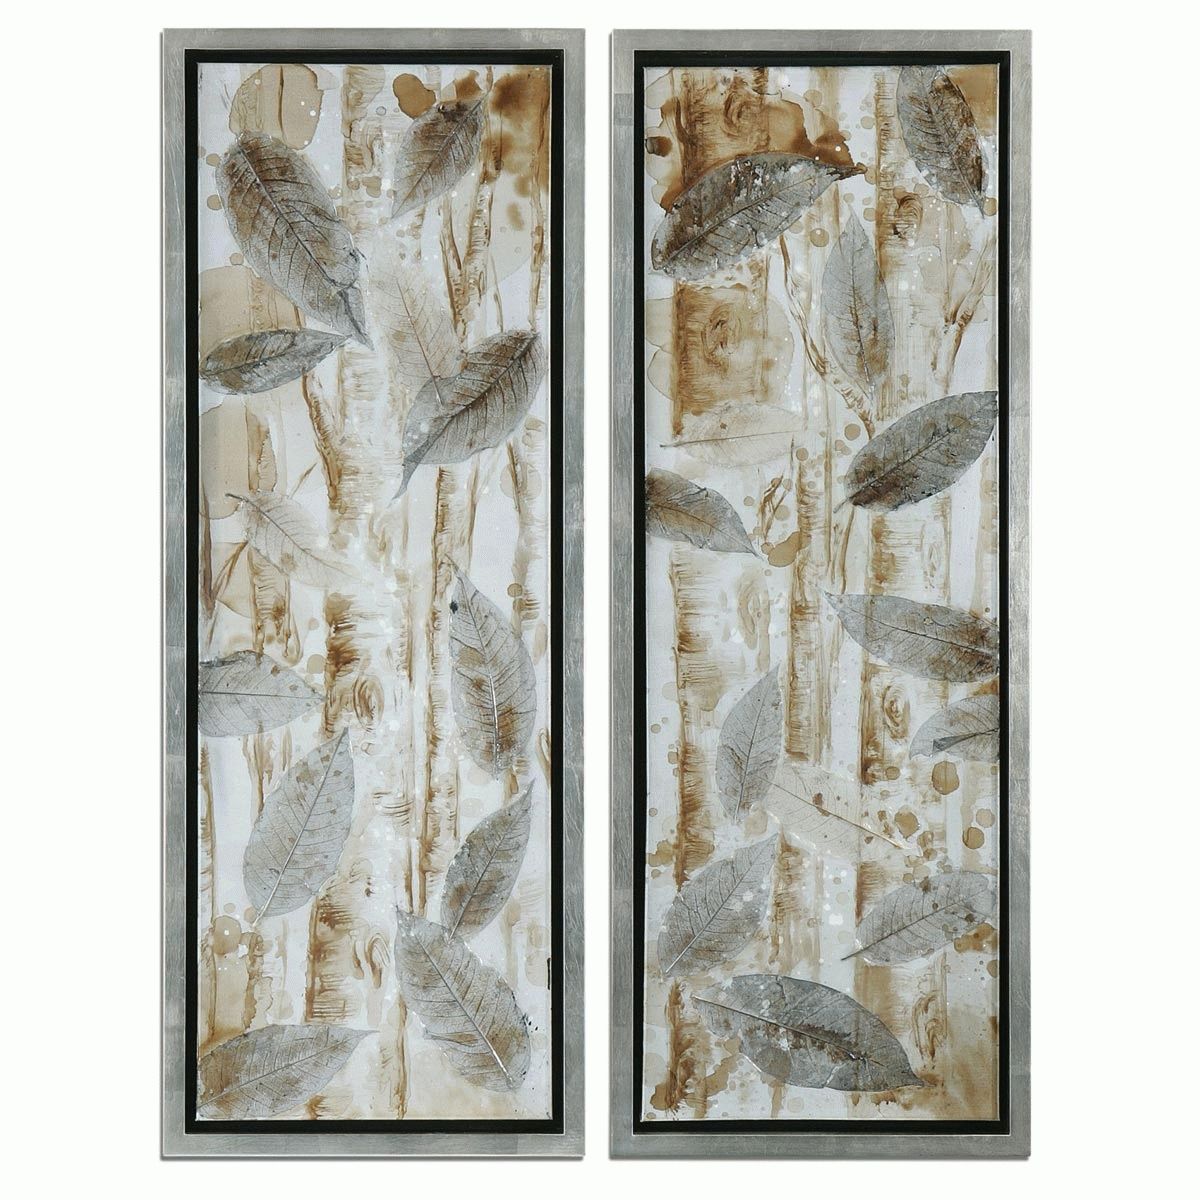 2017 Pressed Leaves Framed Wall Art – Set Of 2 For Cheap Wall Art Sets (View 11 of 15)